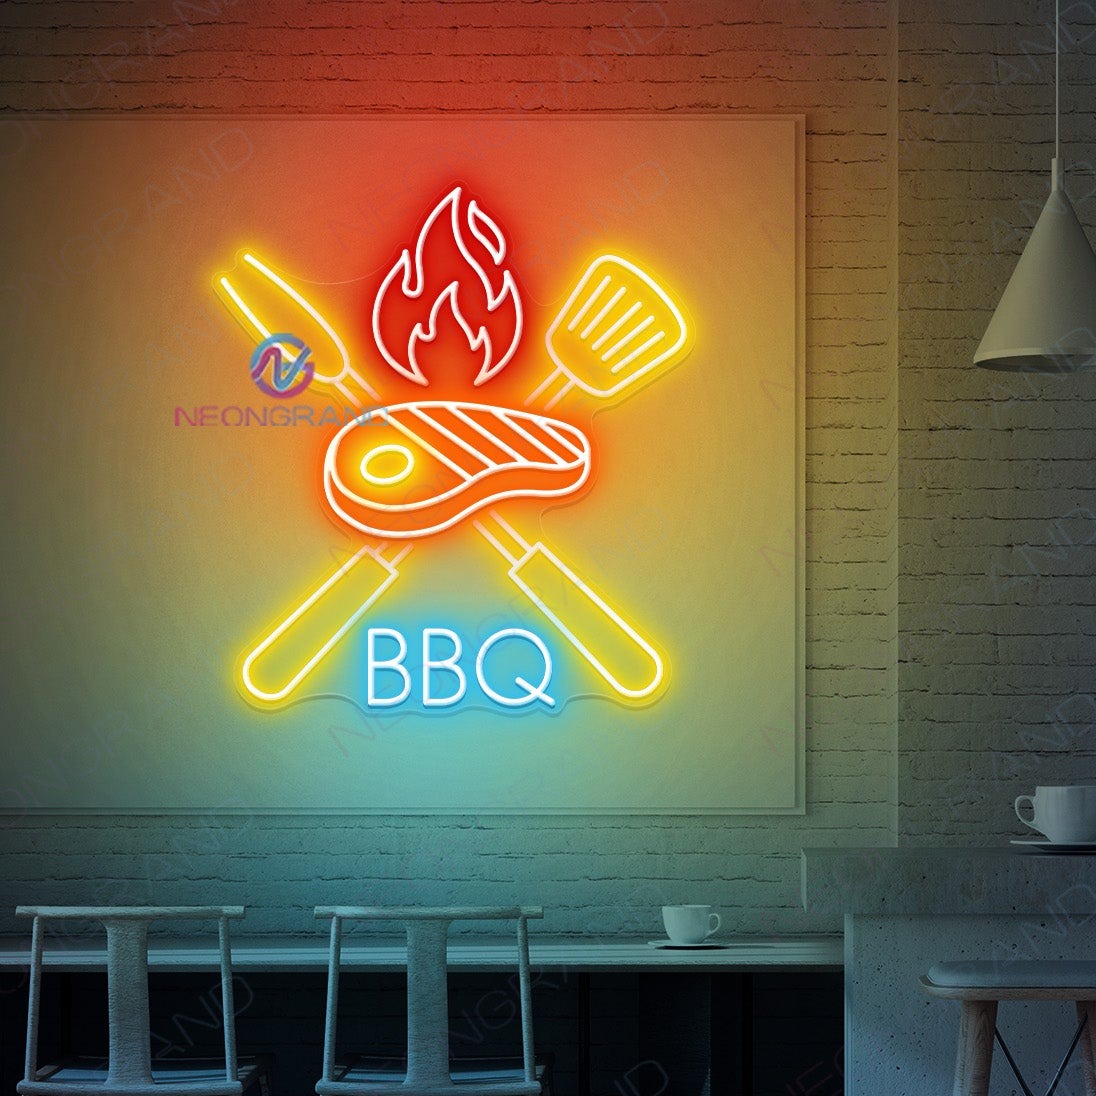 Neon Barbecue Signs Neon Kitchen Sign Led Light yellow